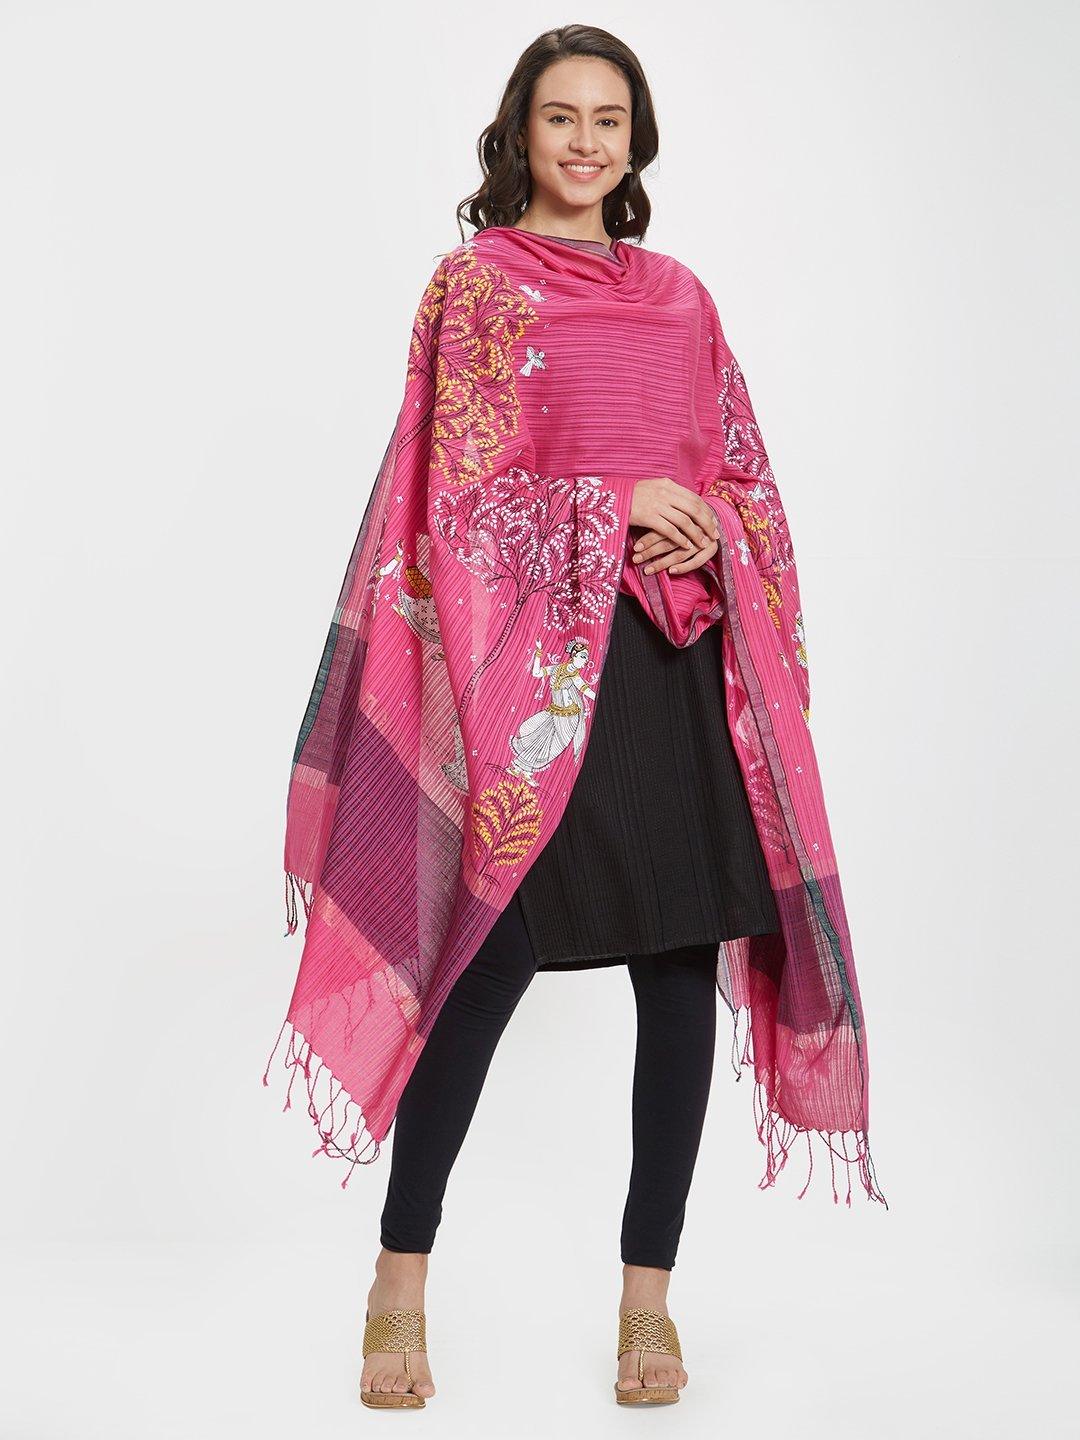 CraftsCollection.in - Pink Cotton Dupatta with handpainted Pattachitra motifs